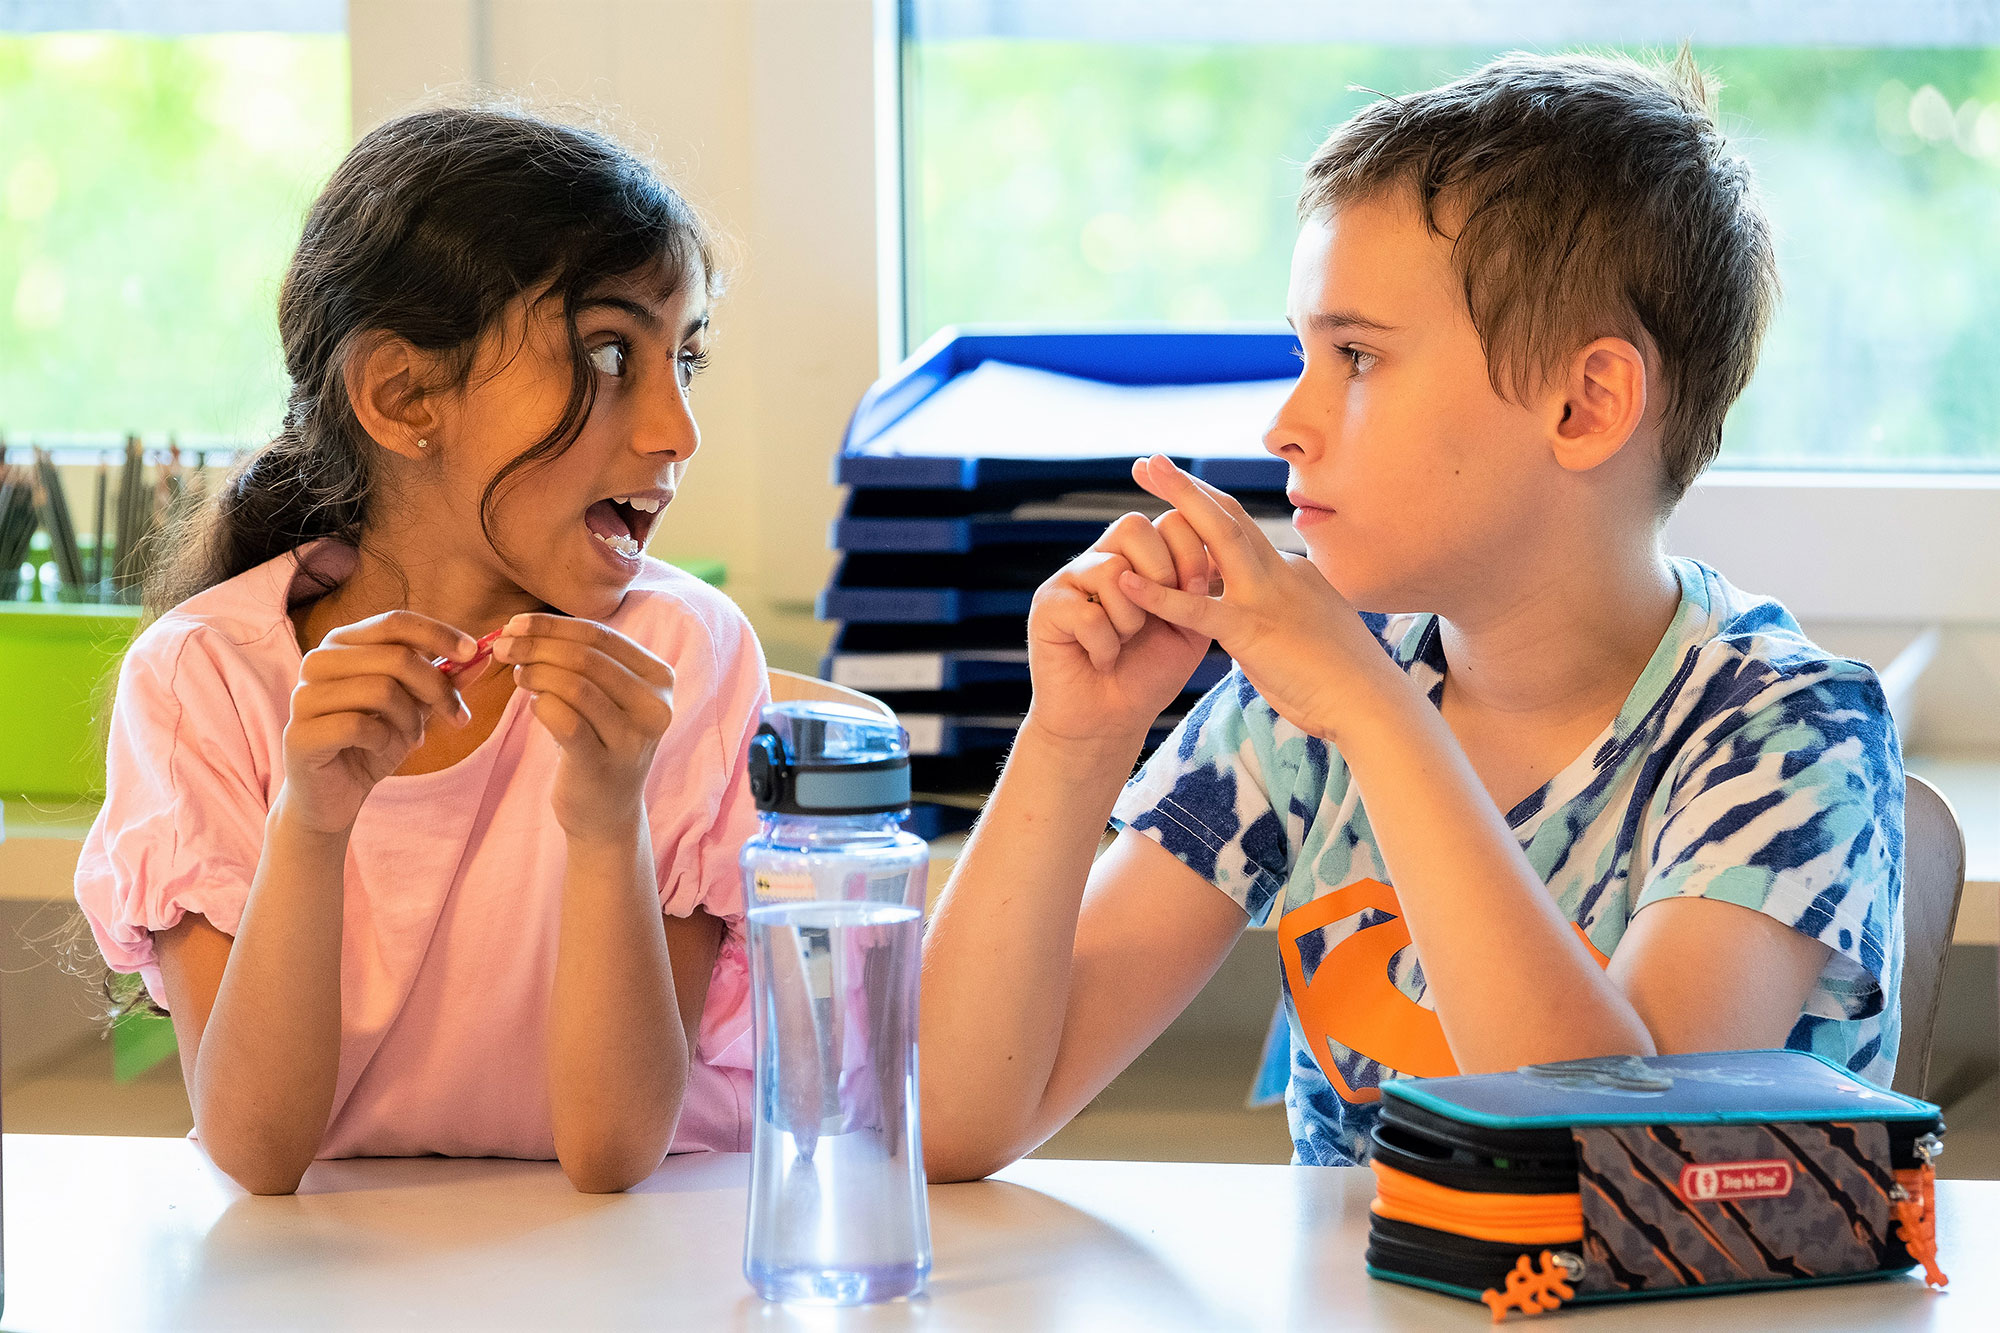 A boy and a girl sit together at the table in a primary school classroom and discuss something.	